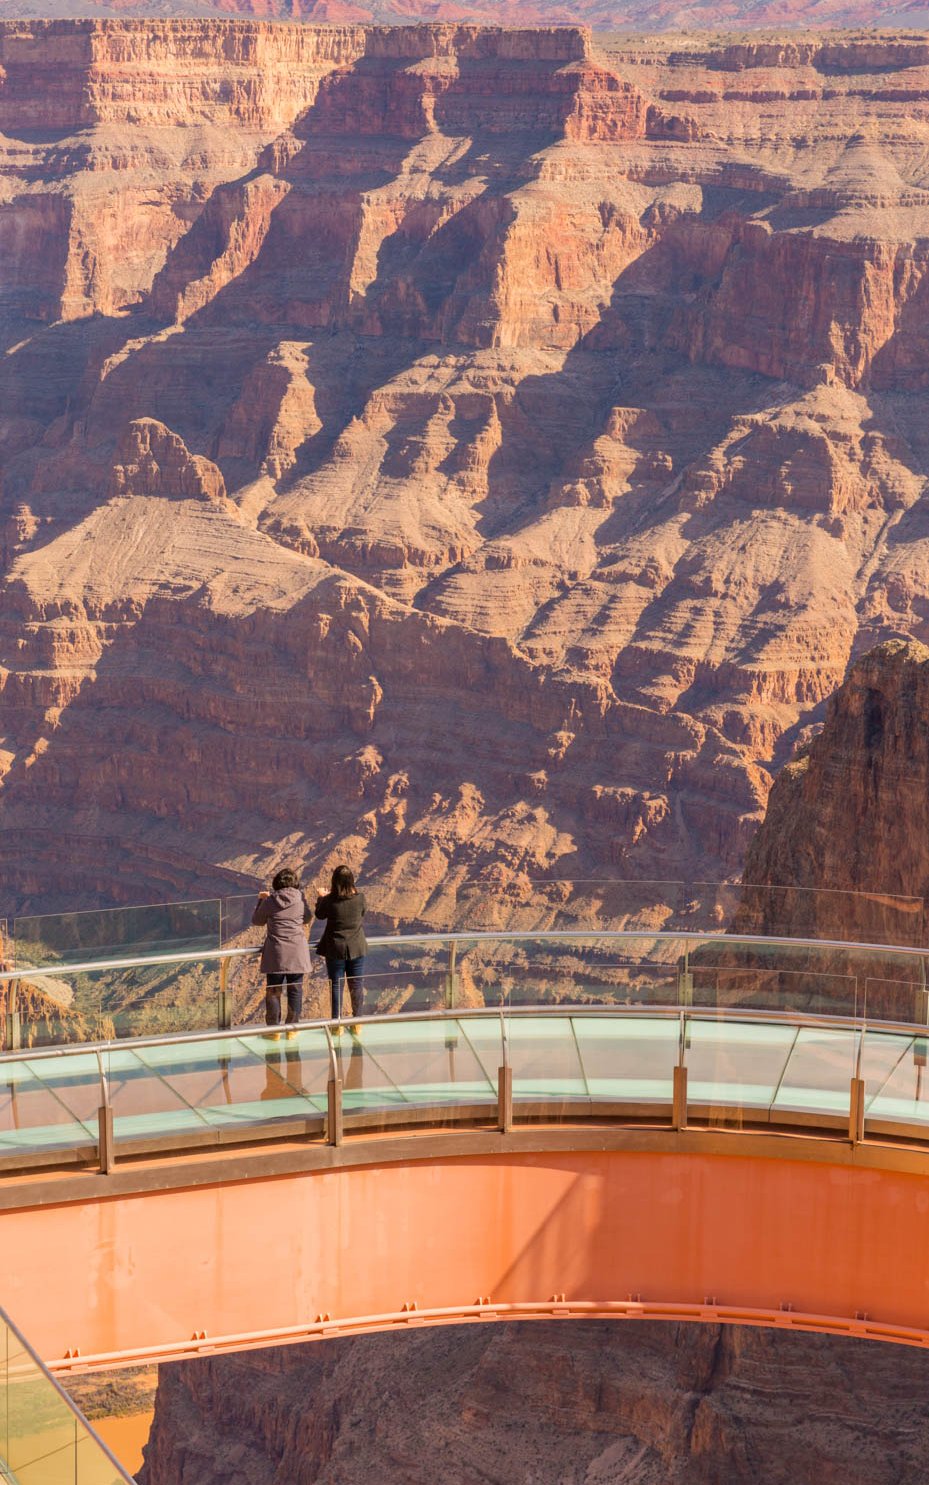 Views from the Skywalk at Grand Canyon West